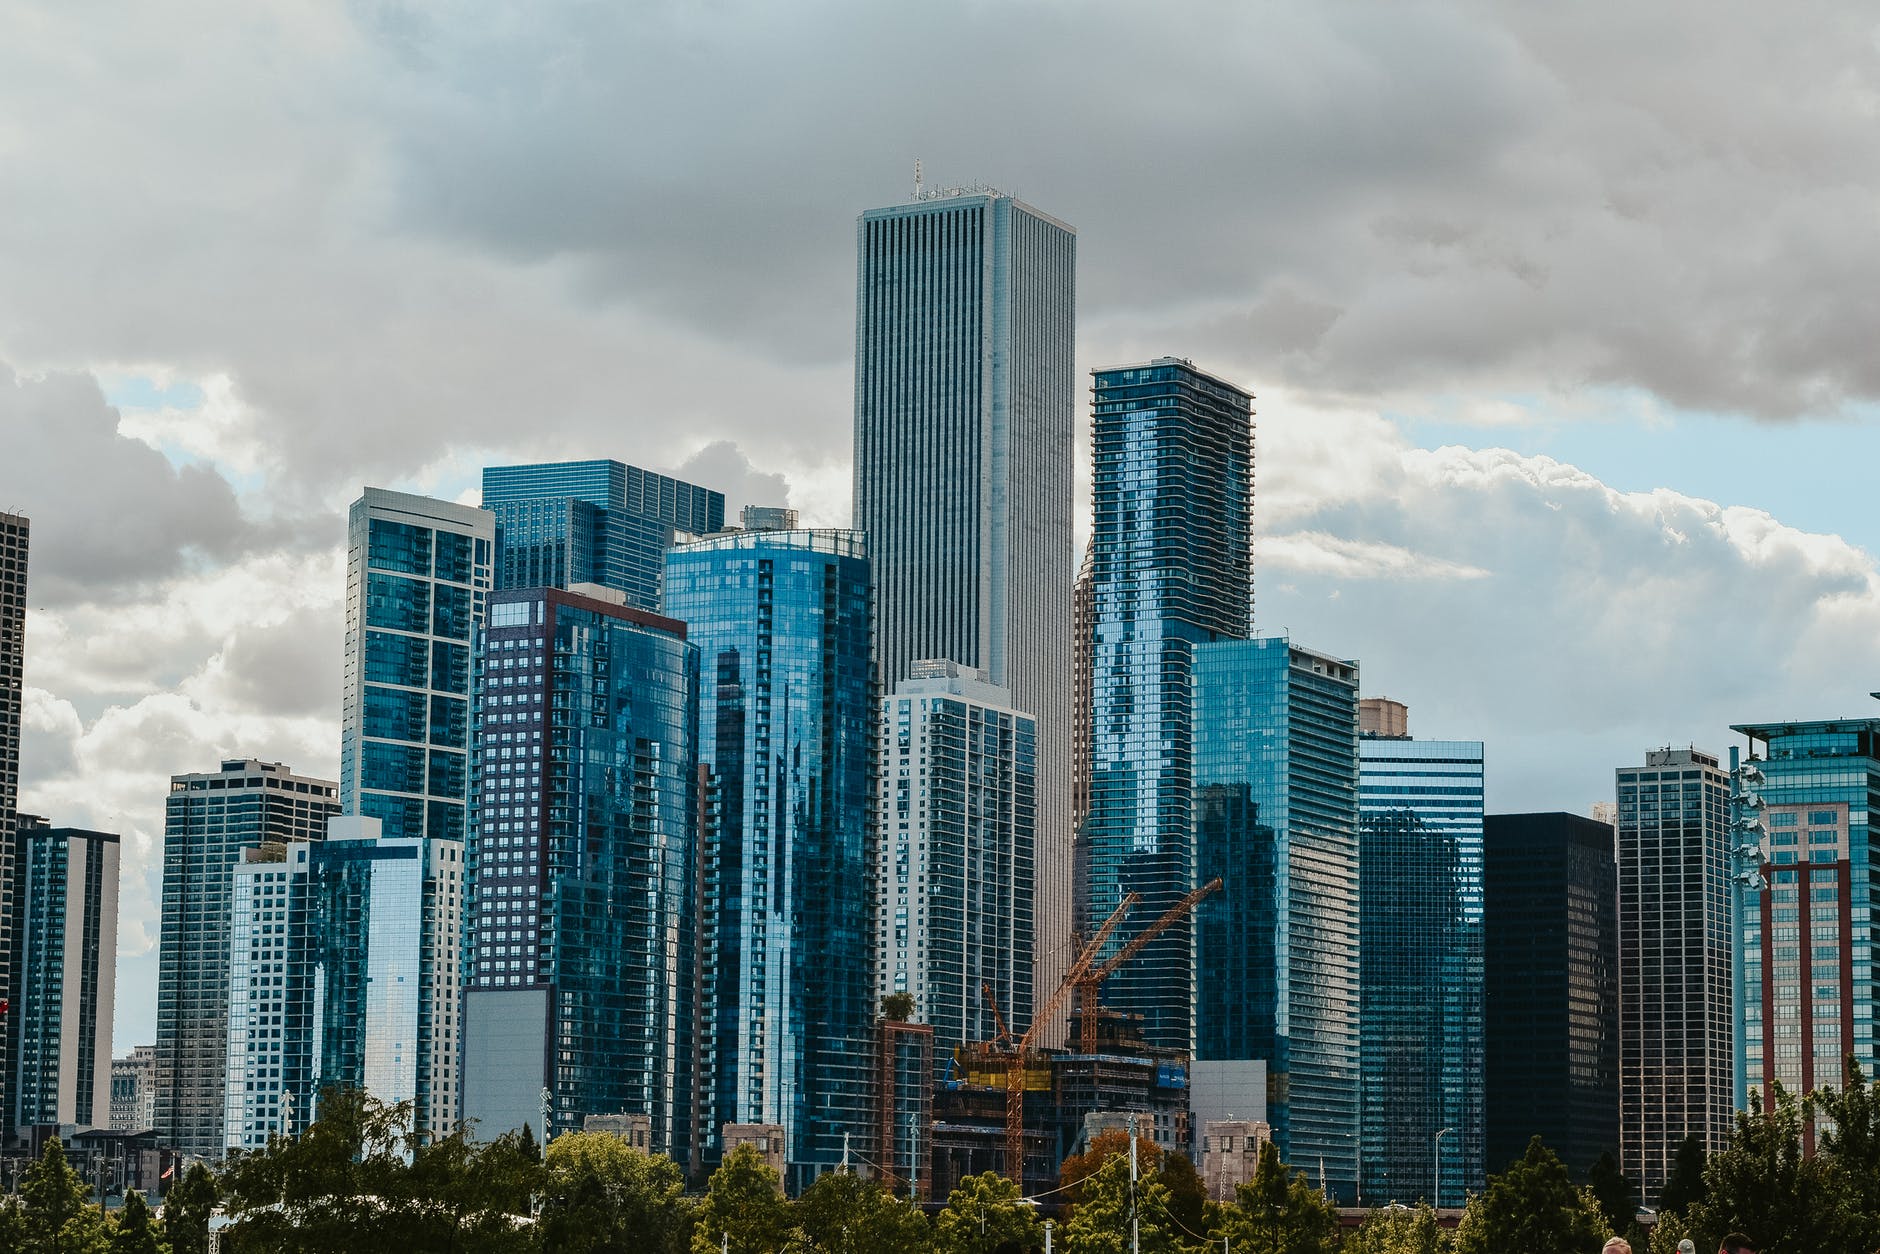 modern district with skyscrapers in cloudy day